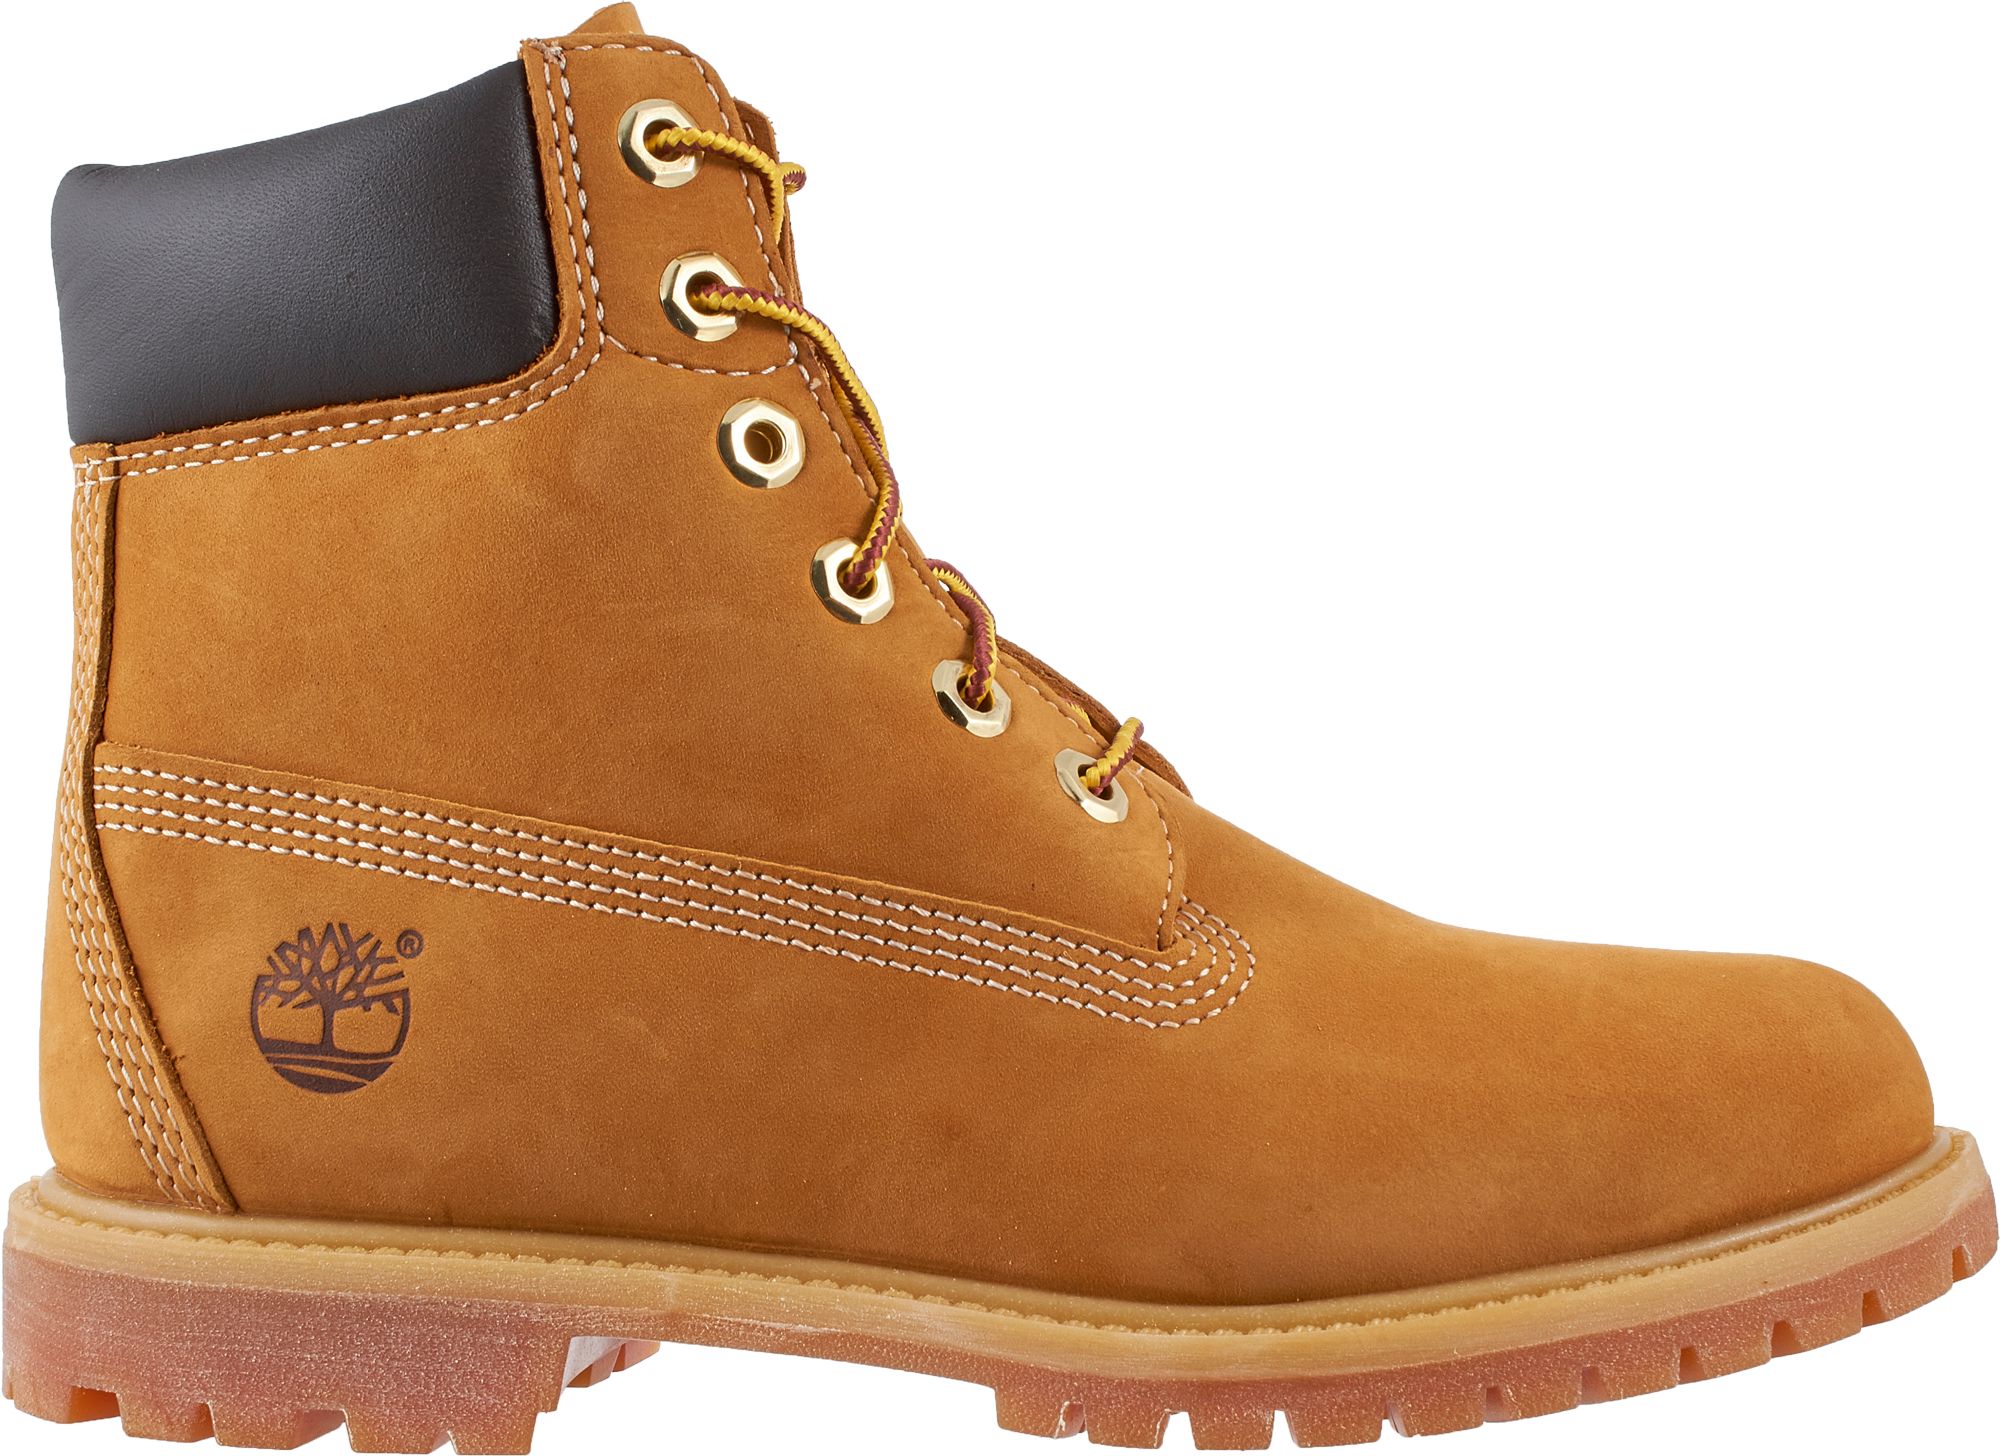 casual timberland boots